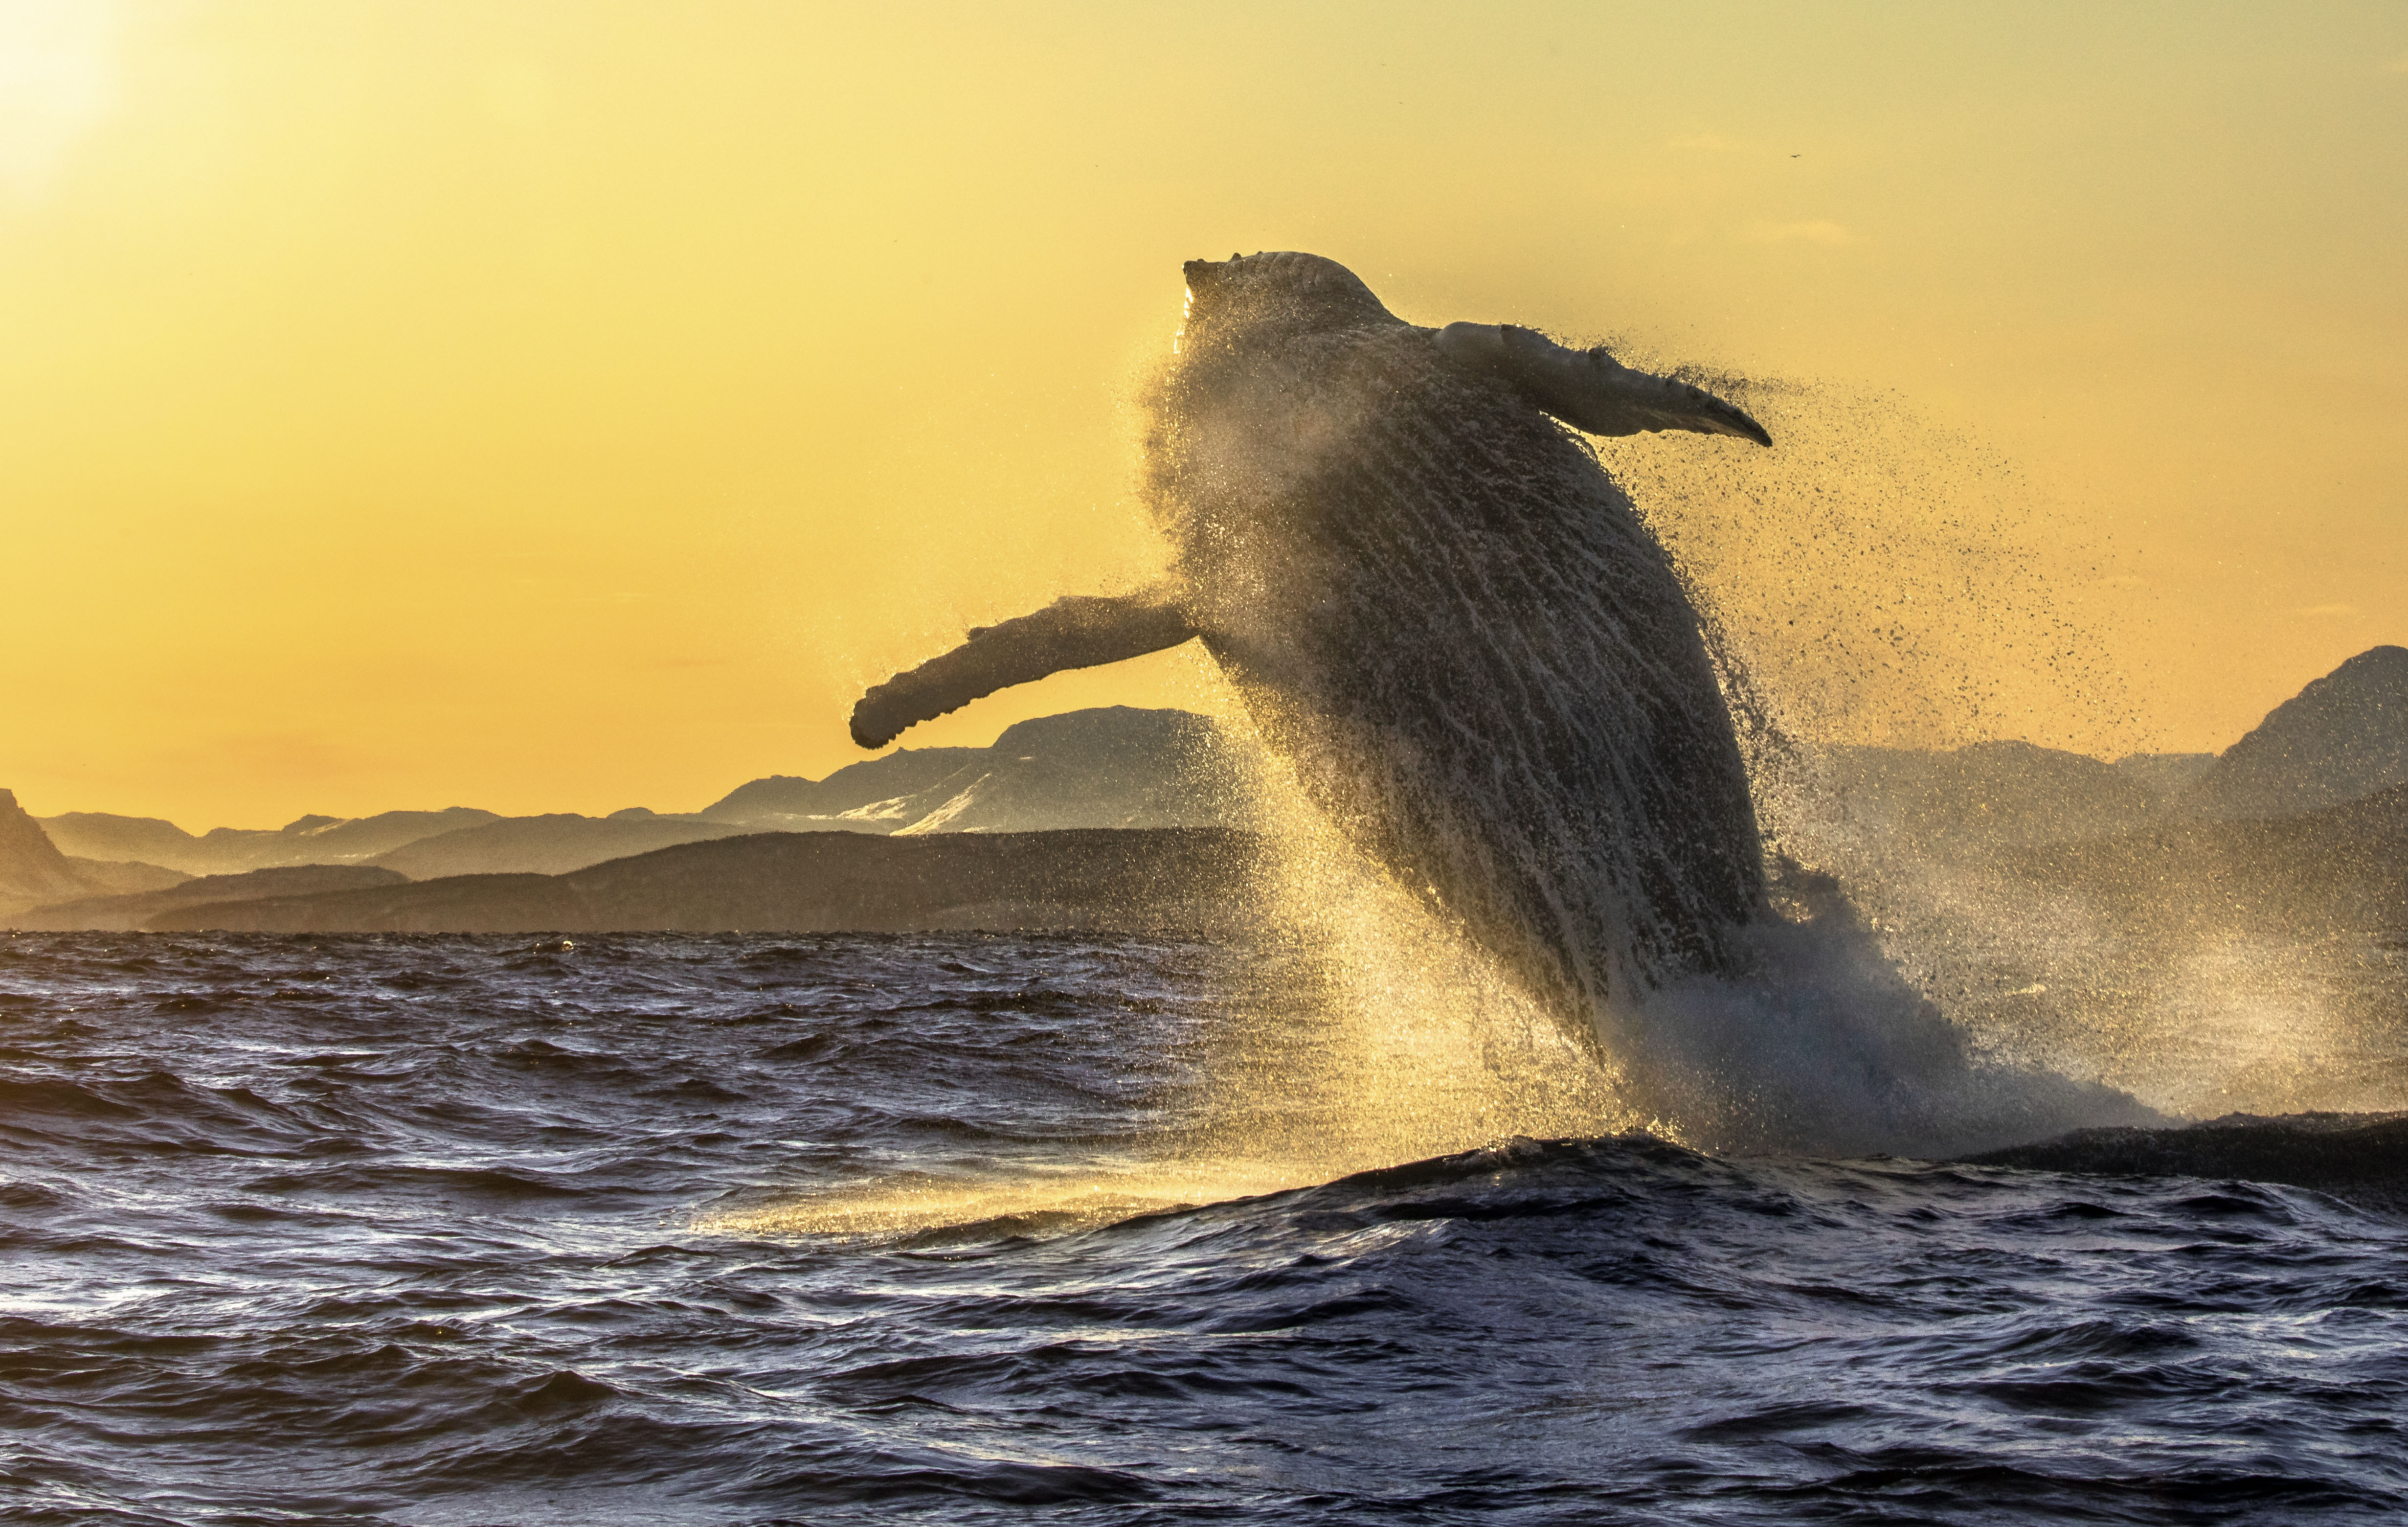 humpback whale jumping out of the water with yellow sky behind